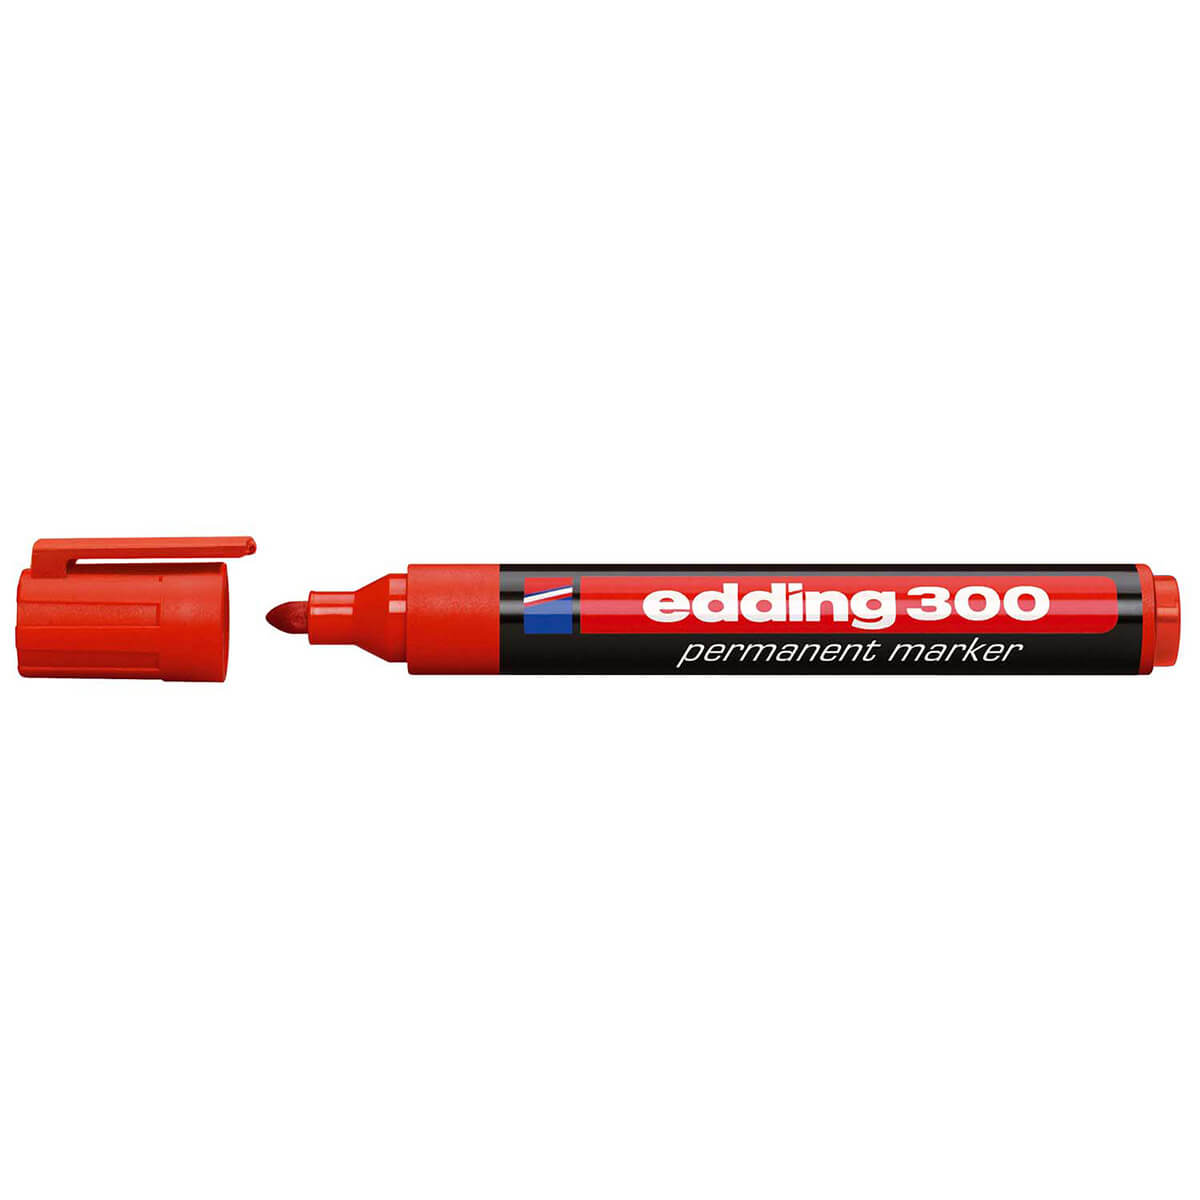 edding 300 permanent markers - refillable, 1.5 - 3 mm red